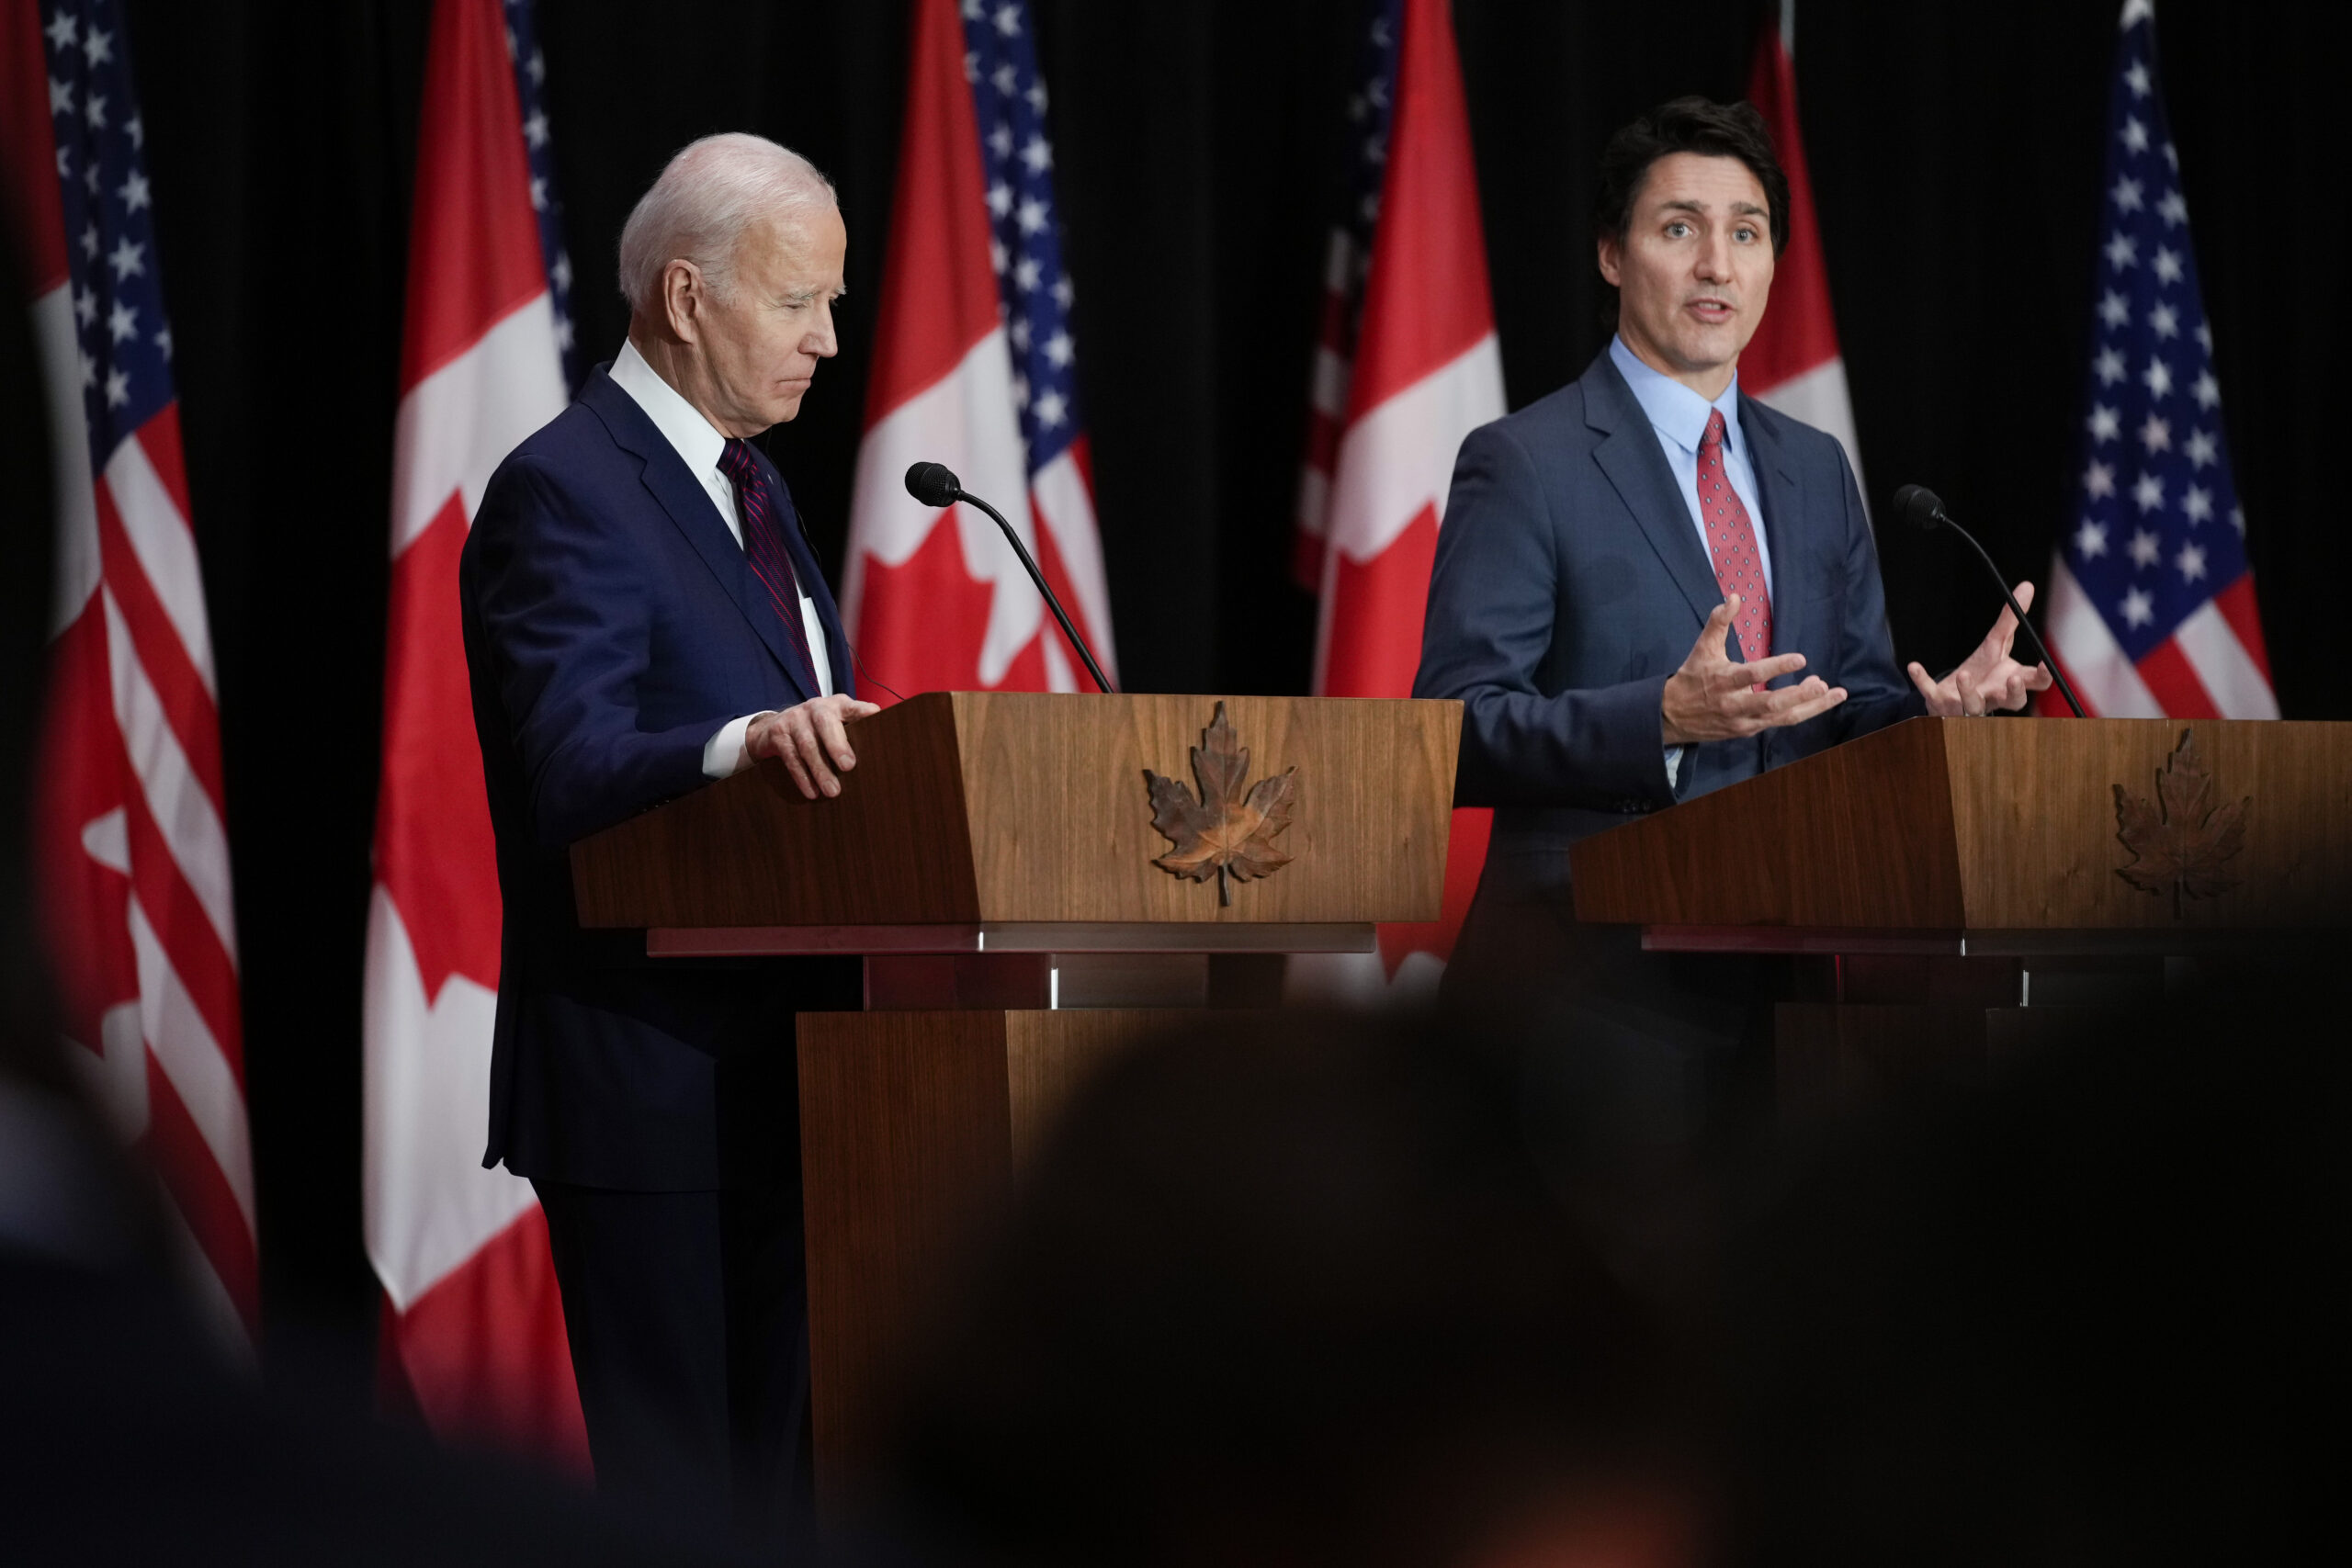 President Joe Biden listens as Canadian Prime Minister Justin Trudeau speaks during a news conference.